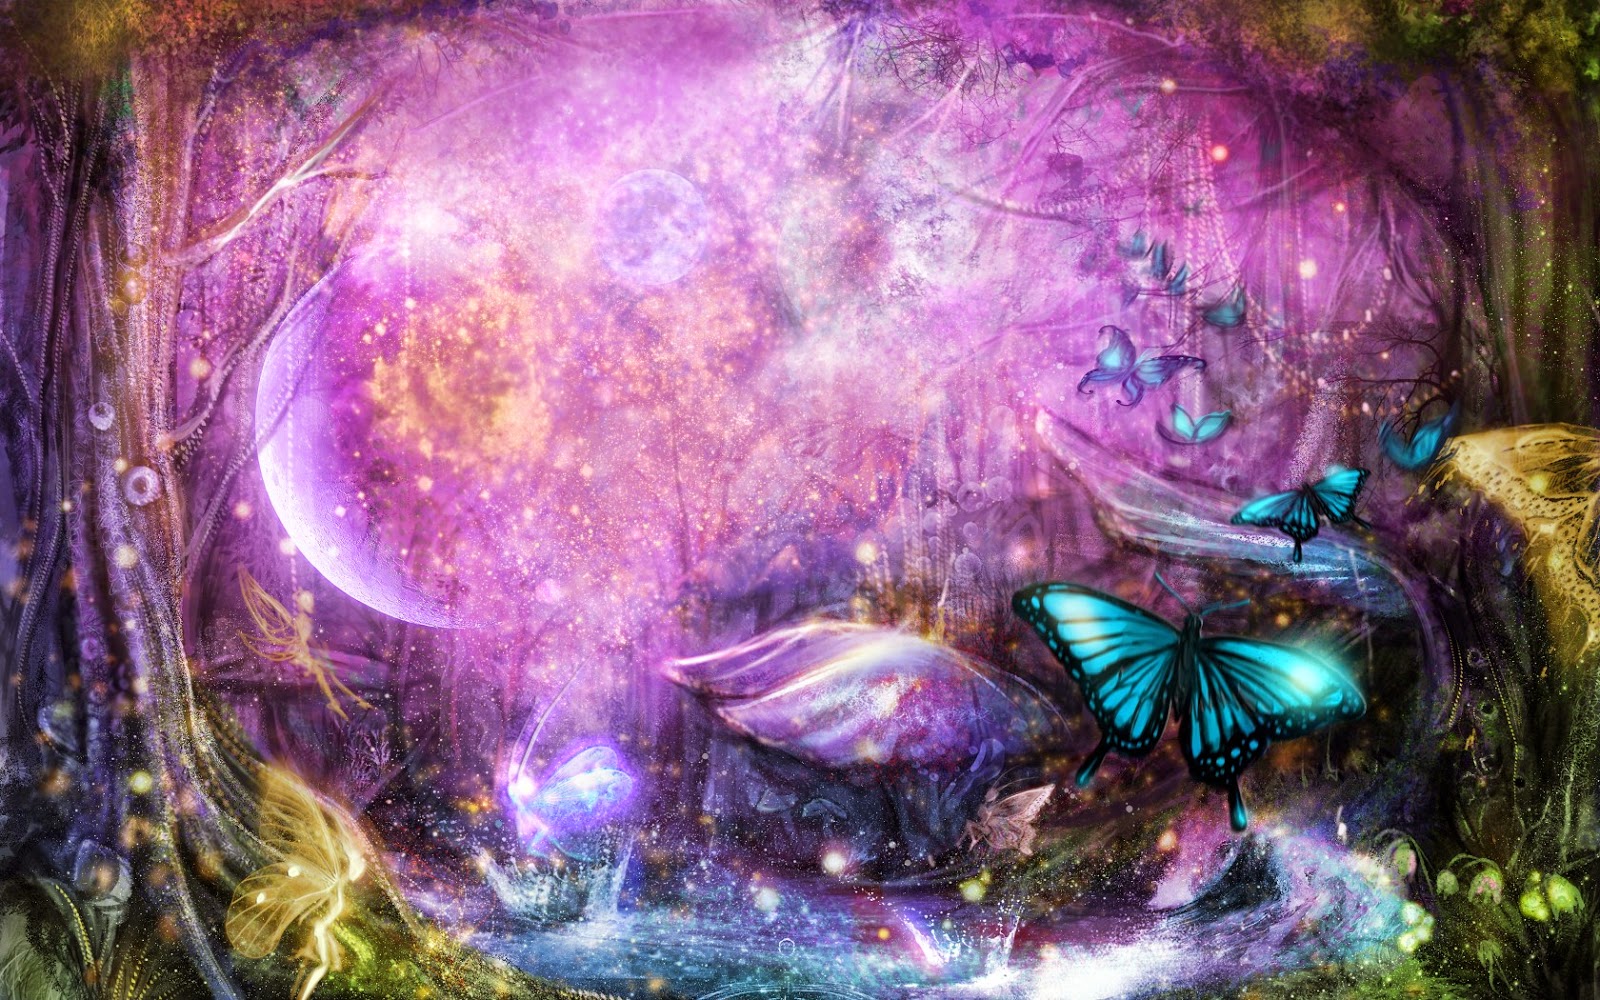 Colorful Butterfly Designs Background For Desktop Abstract